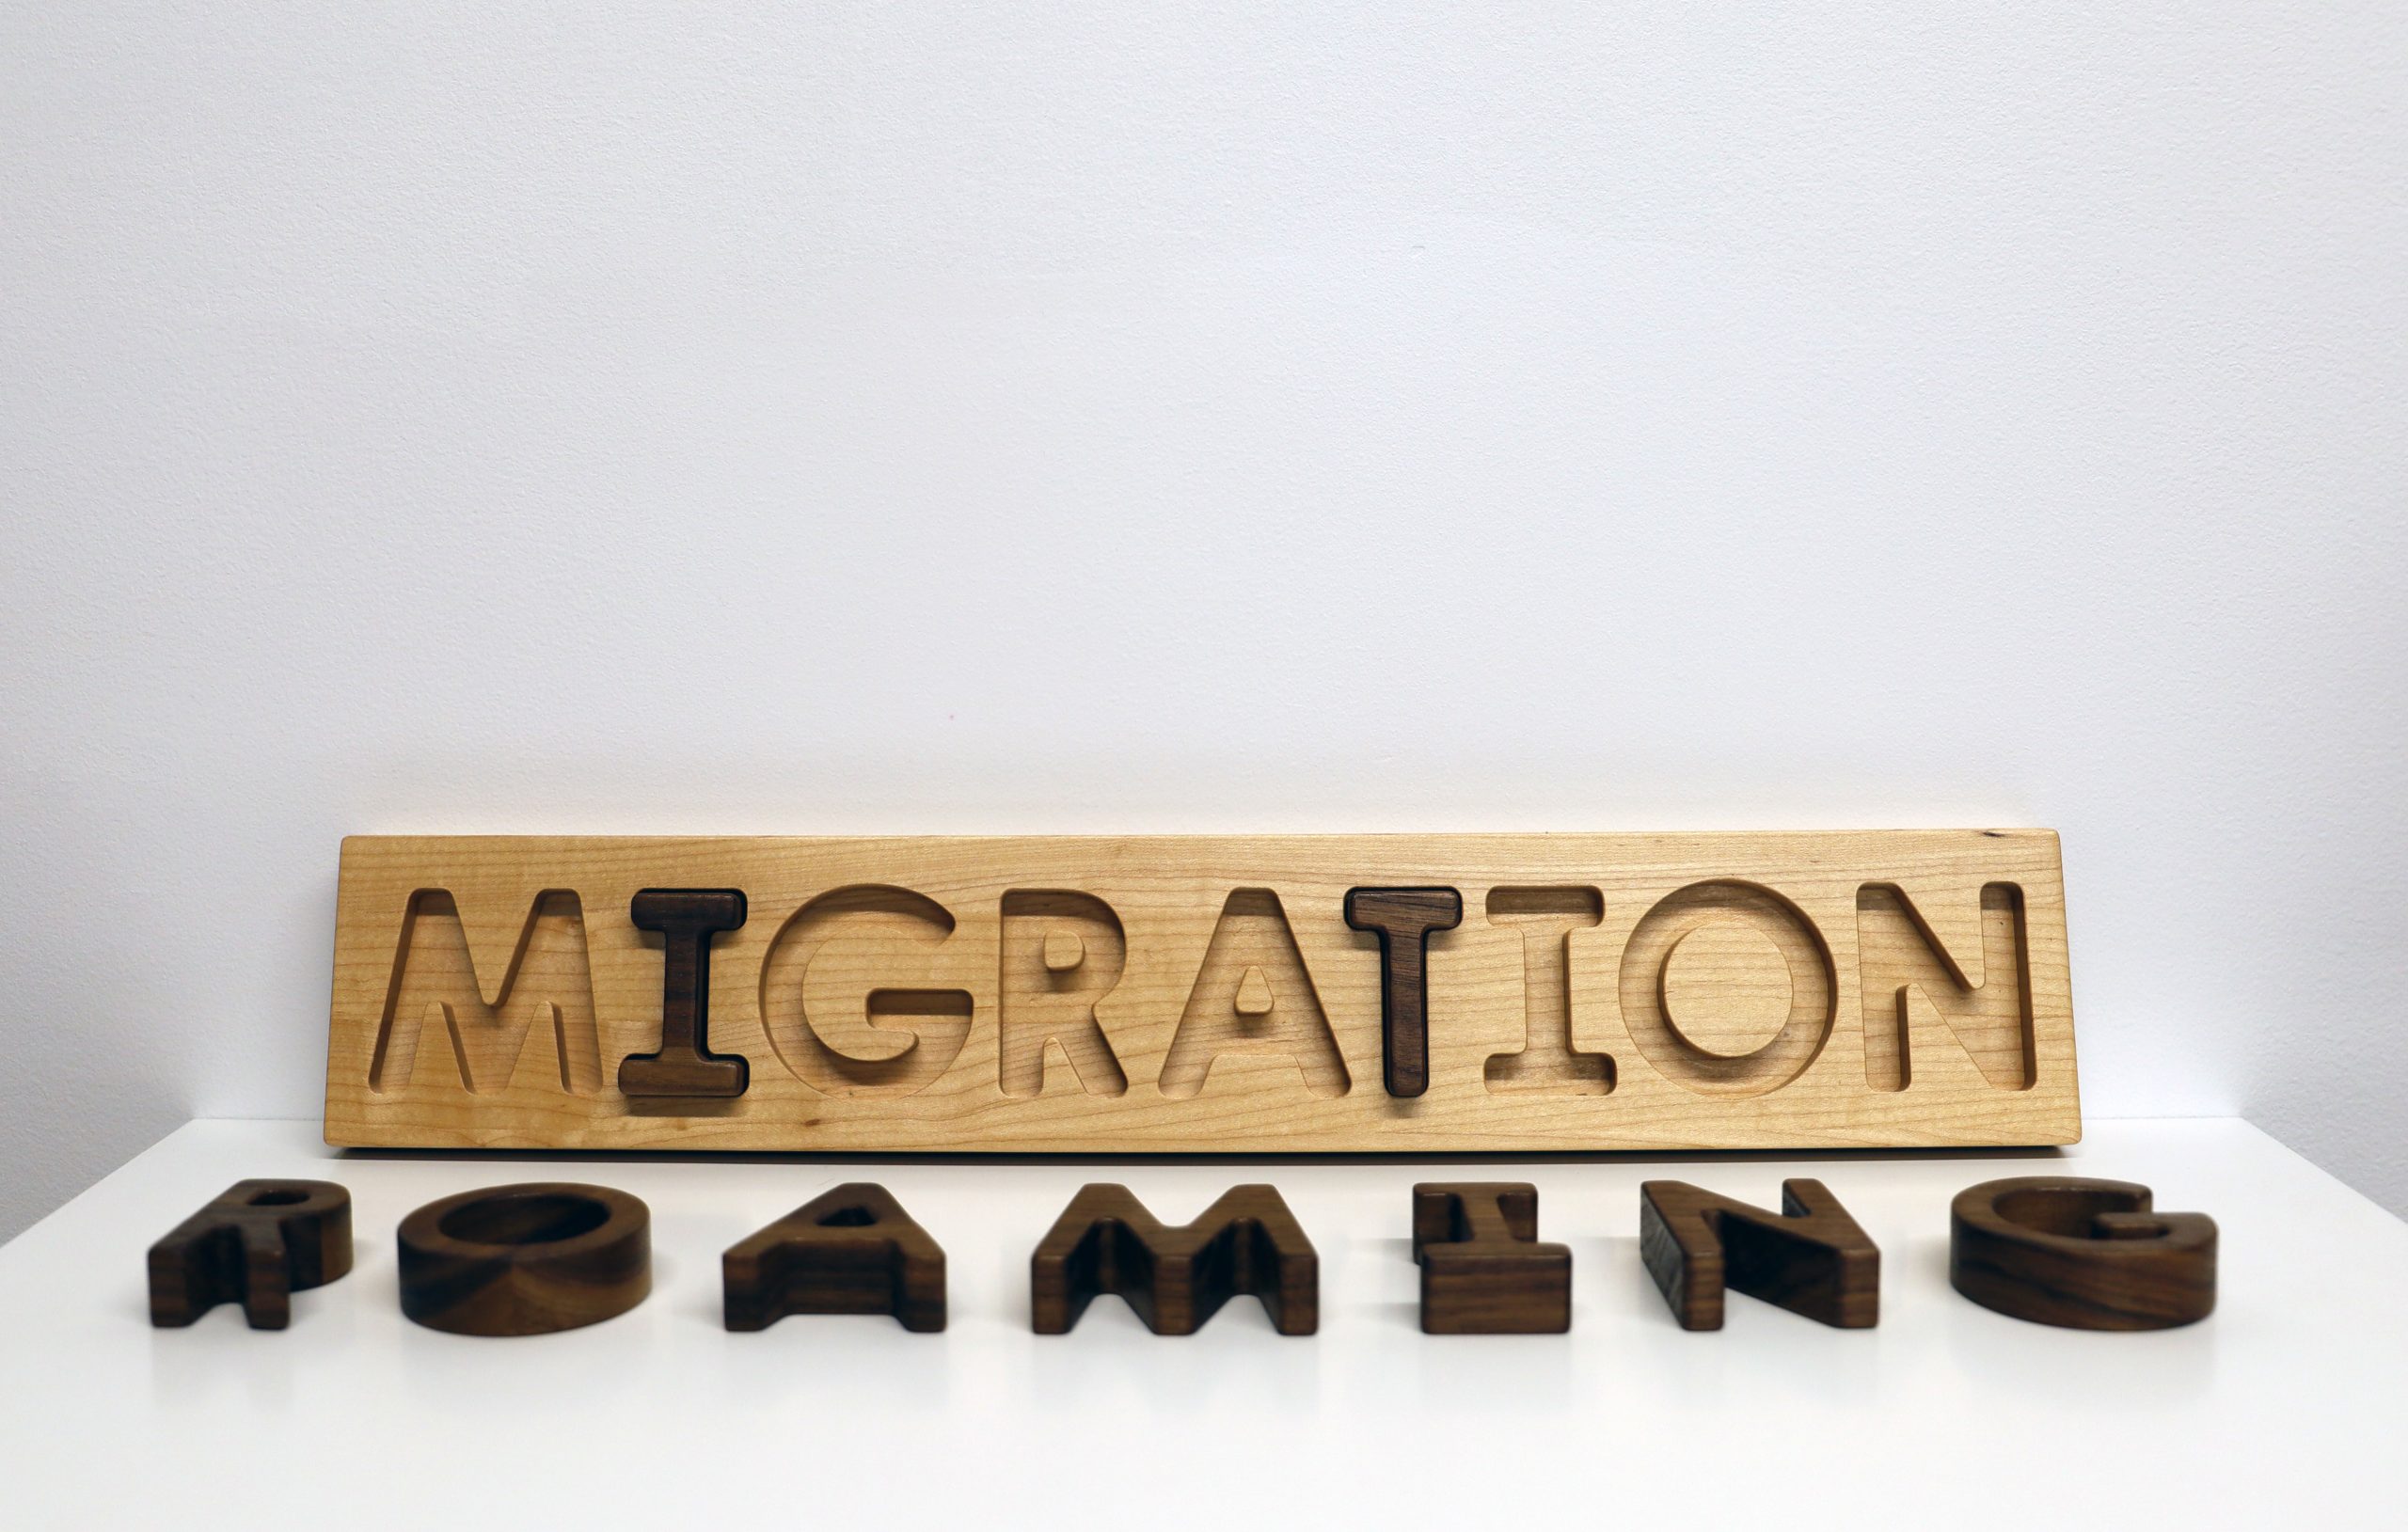 Image: View of Kevin Demery's Migration, oak and walnut wooden puzzle, 3.5 x 19". The word "MIGRATION" is lasercut on a rectangular block of light-colored wood and shown leaning on a plinth against the gallery wall. The word "ROAMING" is shown laid flat on the plinth using dark-colored wood cut-outs. The "I" and "T" in "MIGRATION" are filled in using dark-colored wood cut outs. Image courtesy of Gallery Bogart.